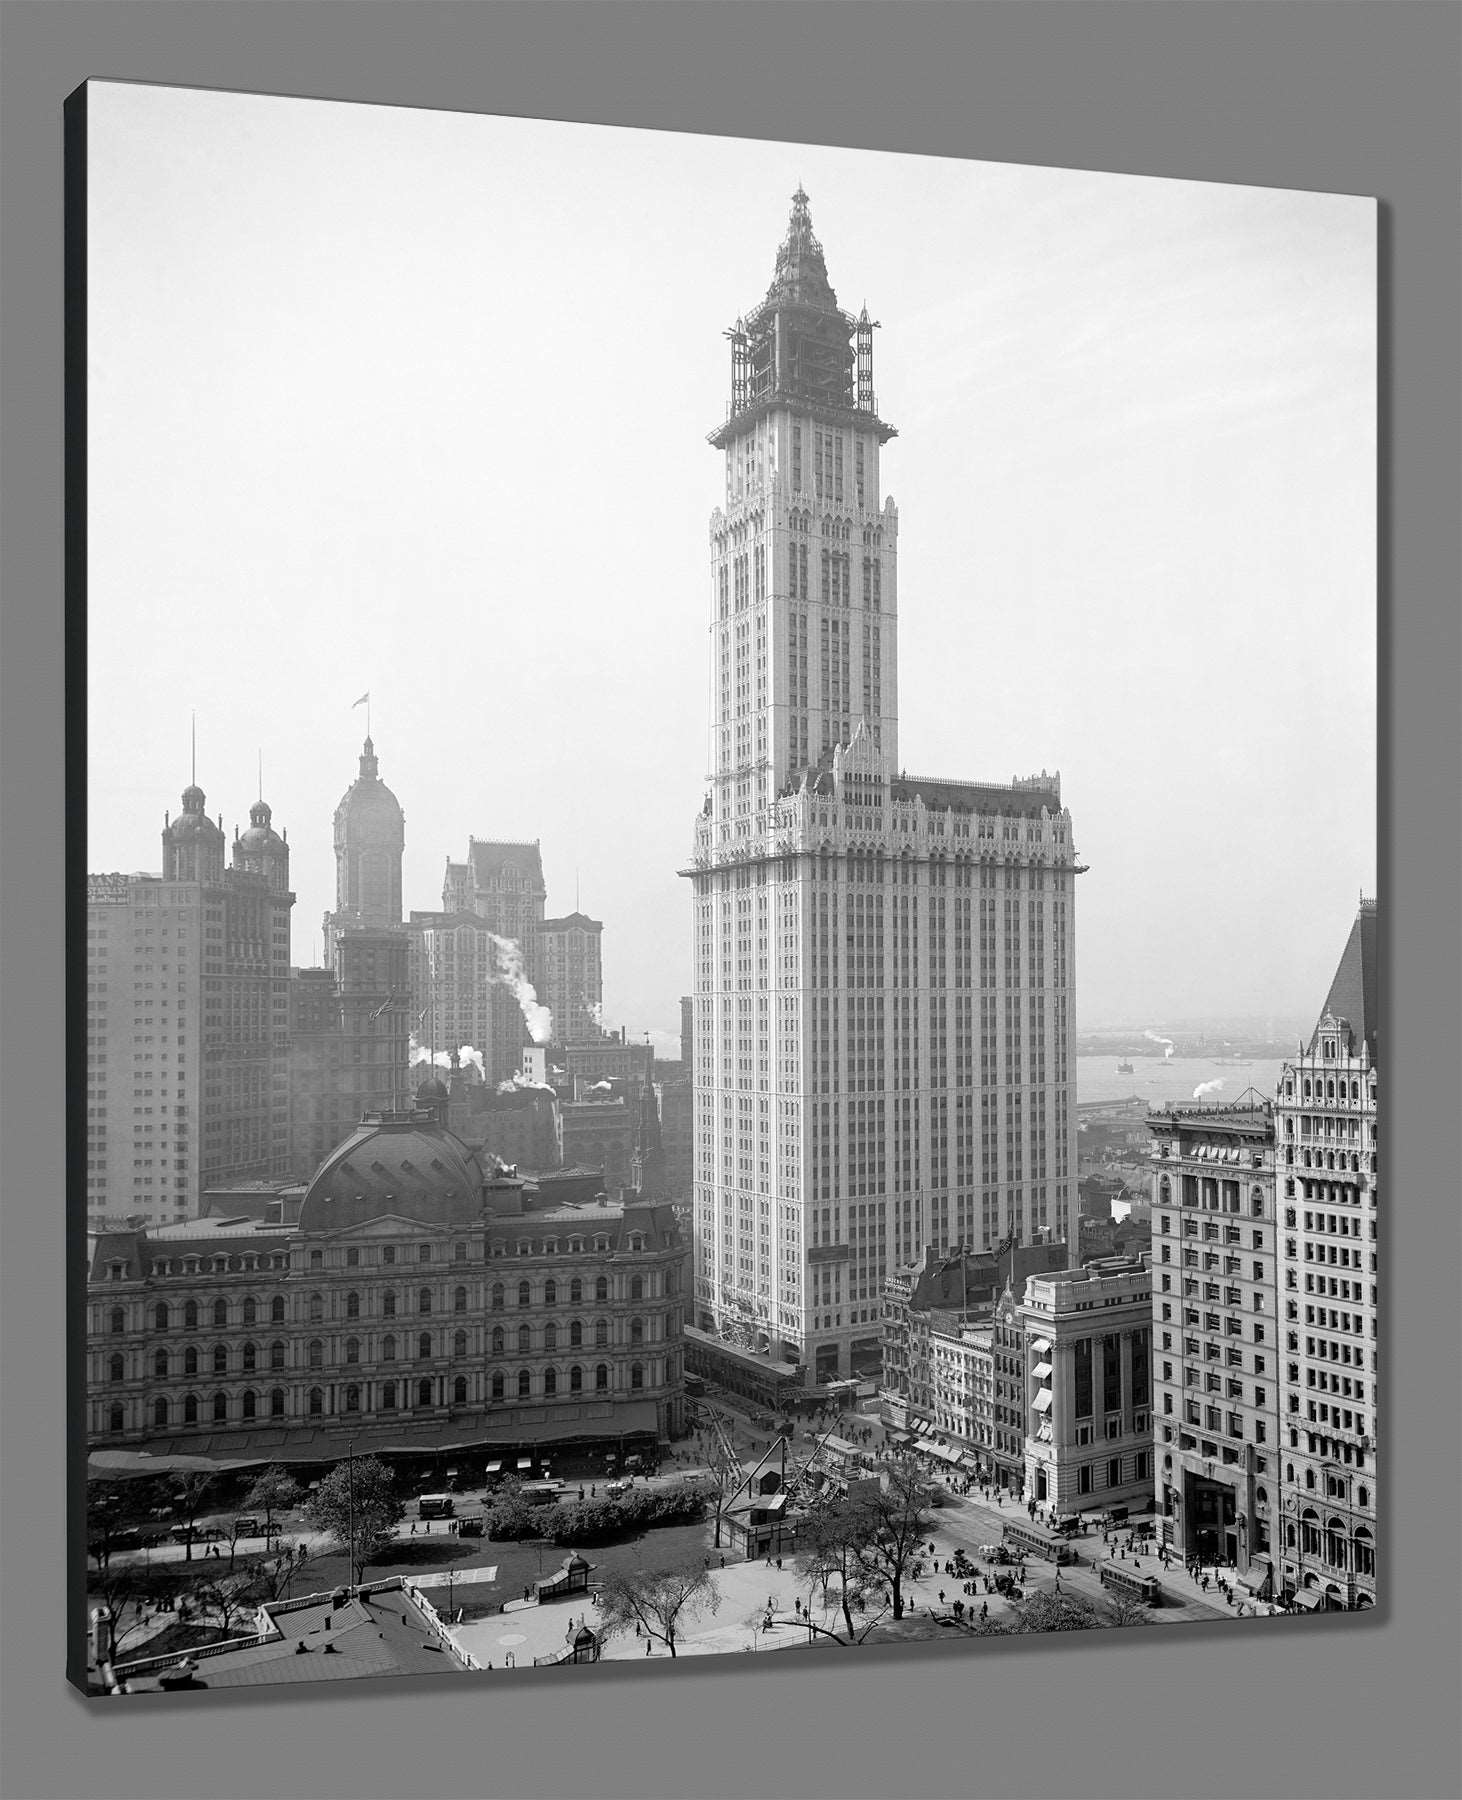 A canvas print rendering of vintage photography featuring New York City's Woolworth Building